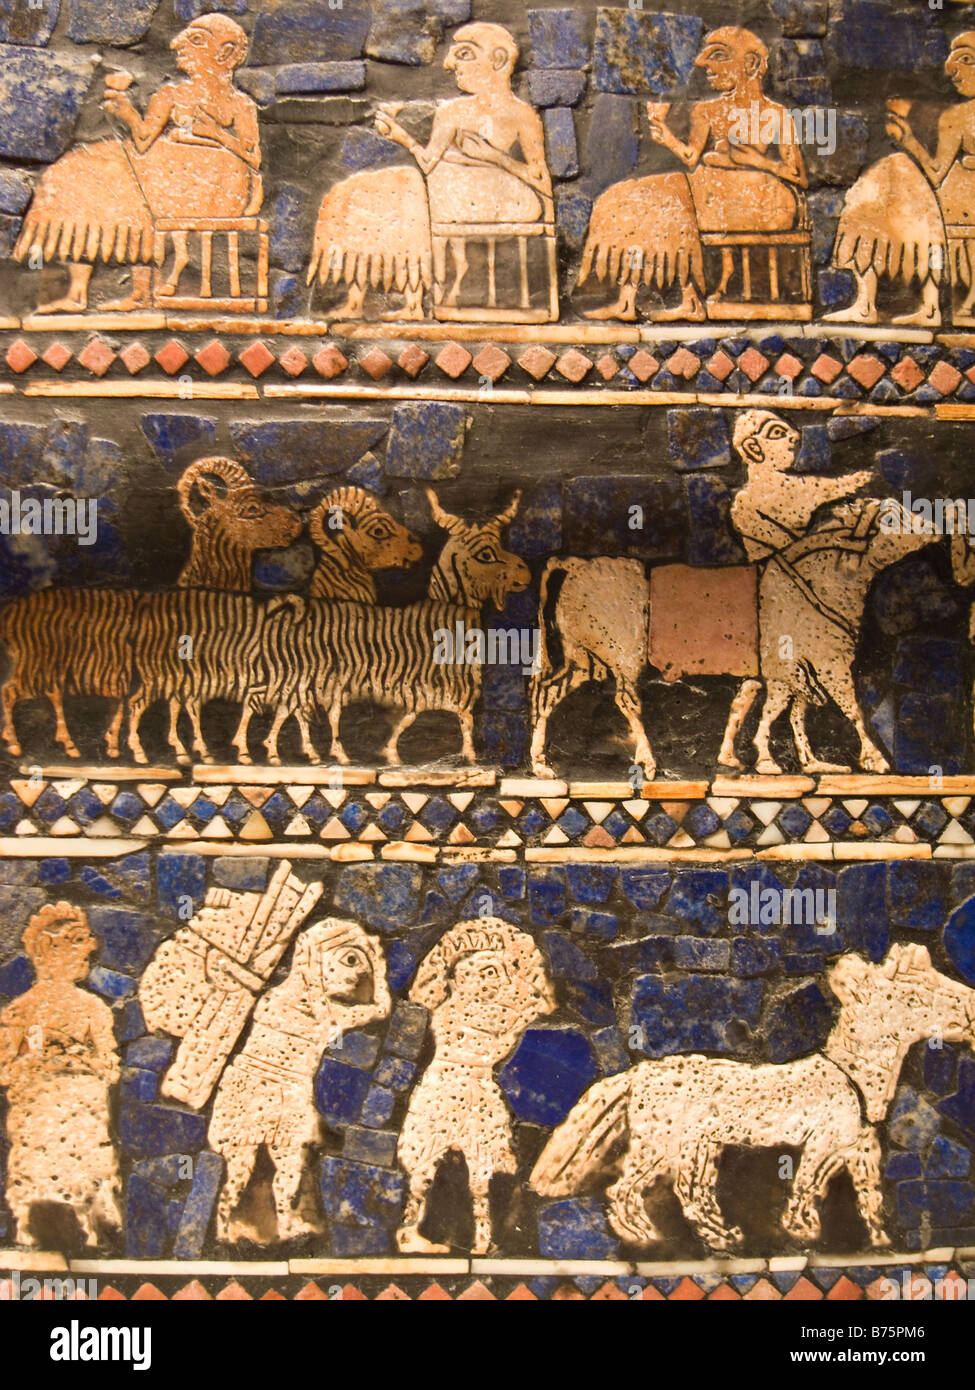 Detail from the Peace side of the Standard of Ur, attendants bringing sheep and donkey to the banquet and also friends of the King on the top register Stock Photo